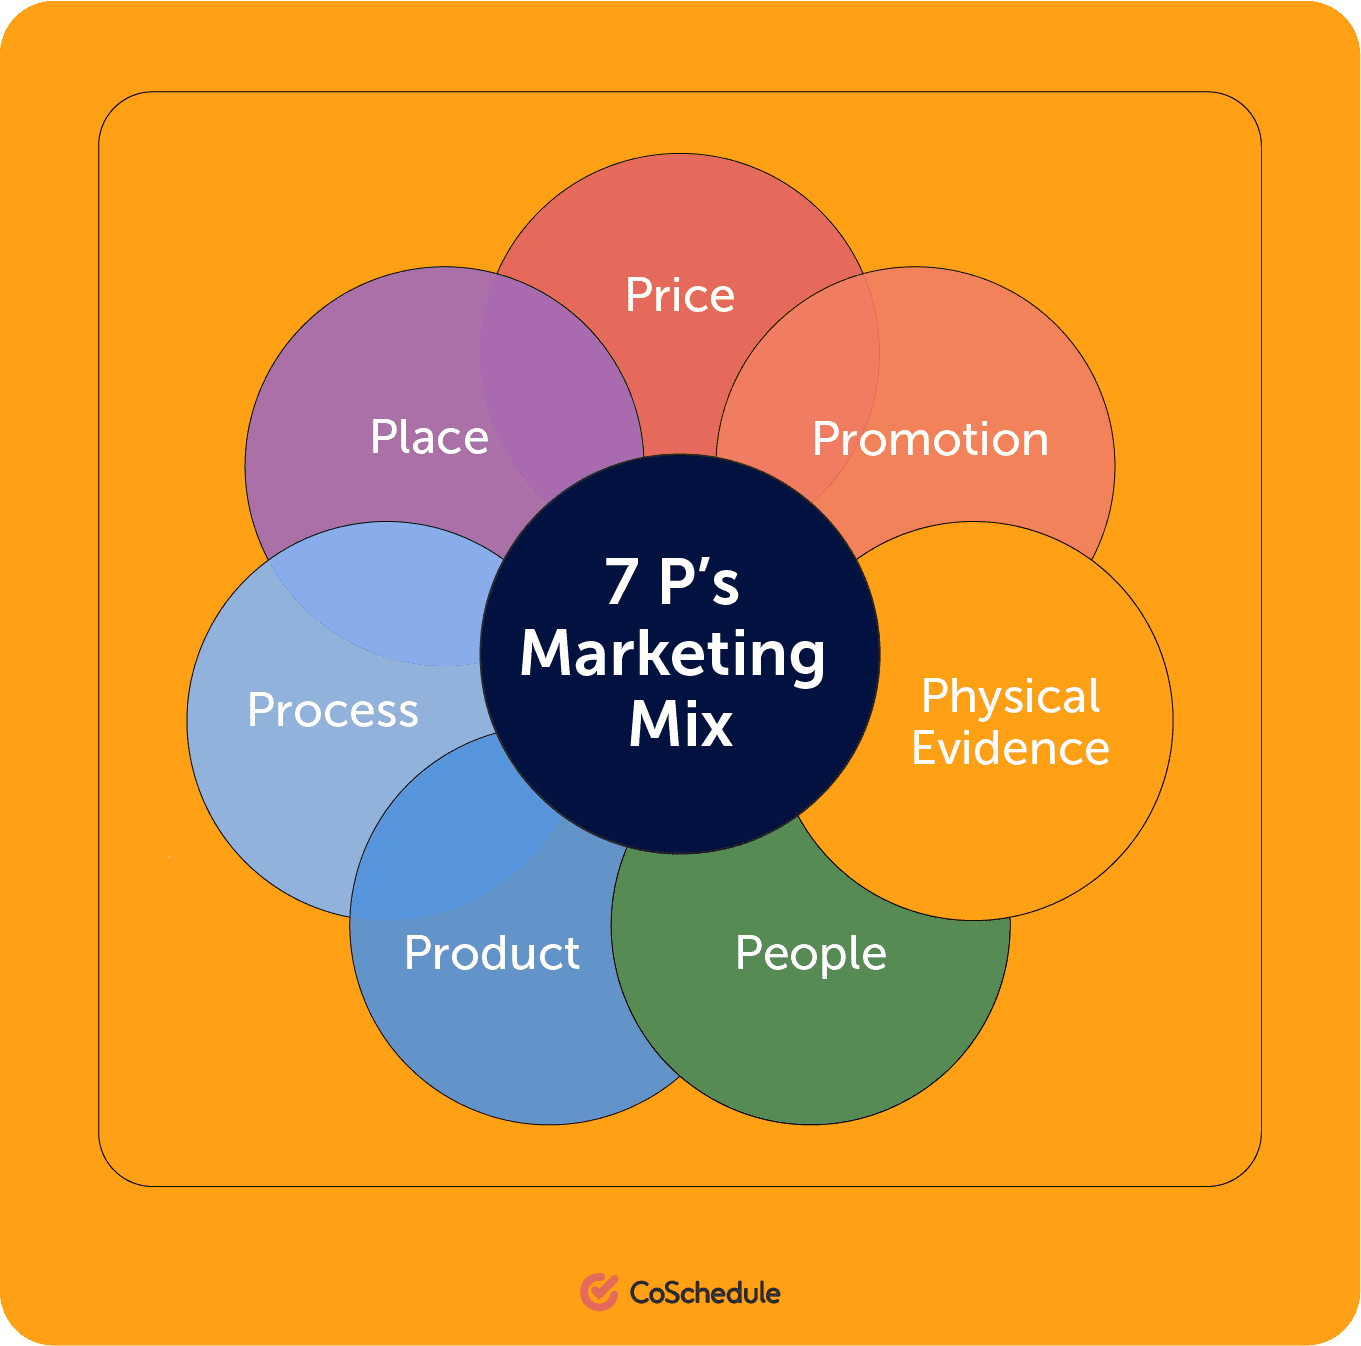 The 7 P's to marketing mix Price, Place, Process, Product, People, Physical Evidence, Promotion